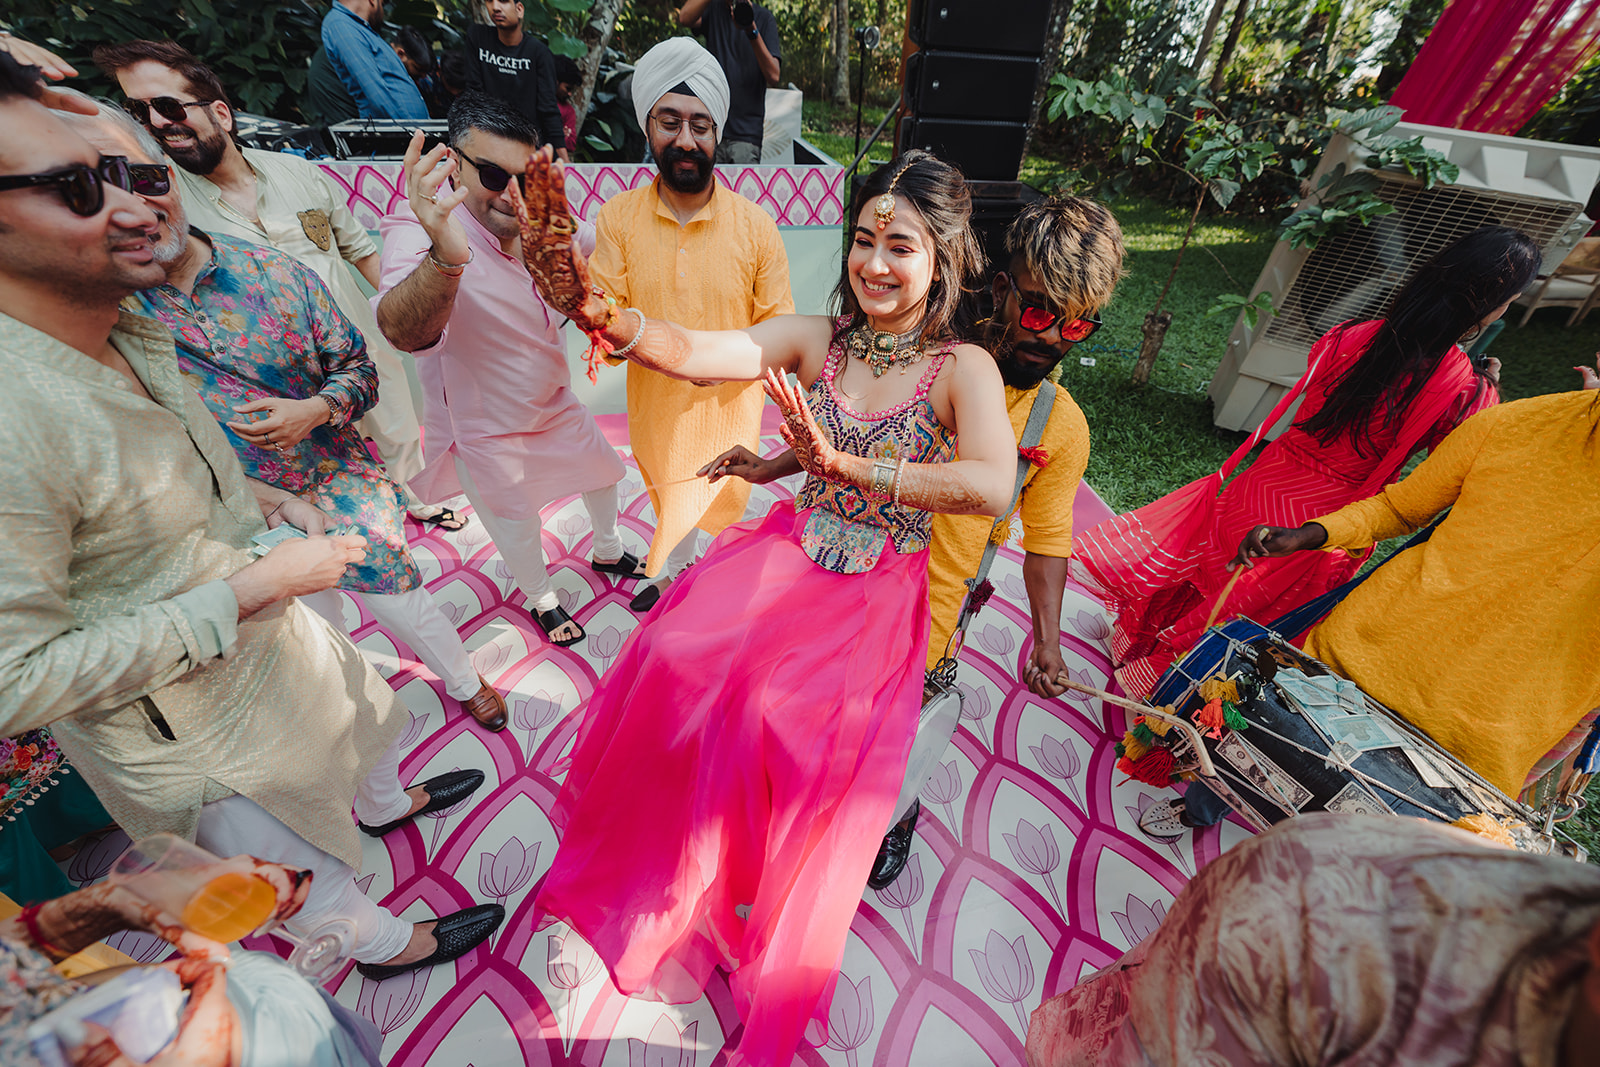 Energetic bride: Dancing with enthusiasm, the bride contributes to the festive atmosphere with the dhol.